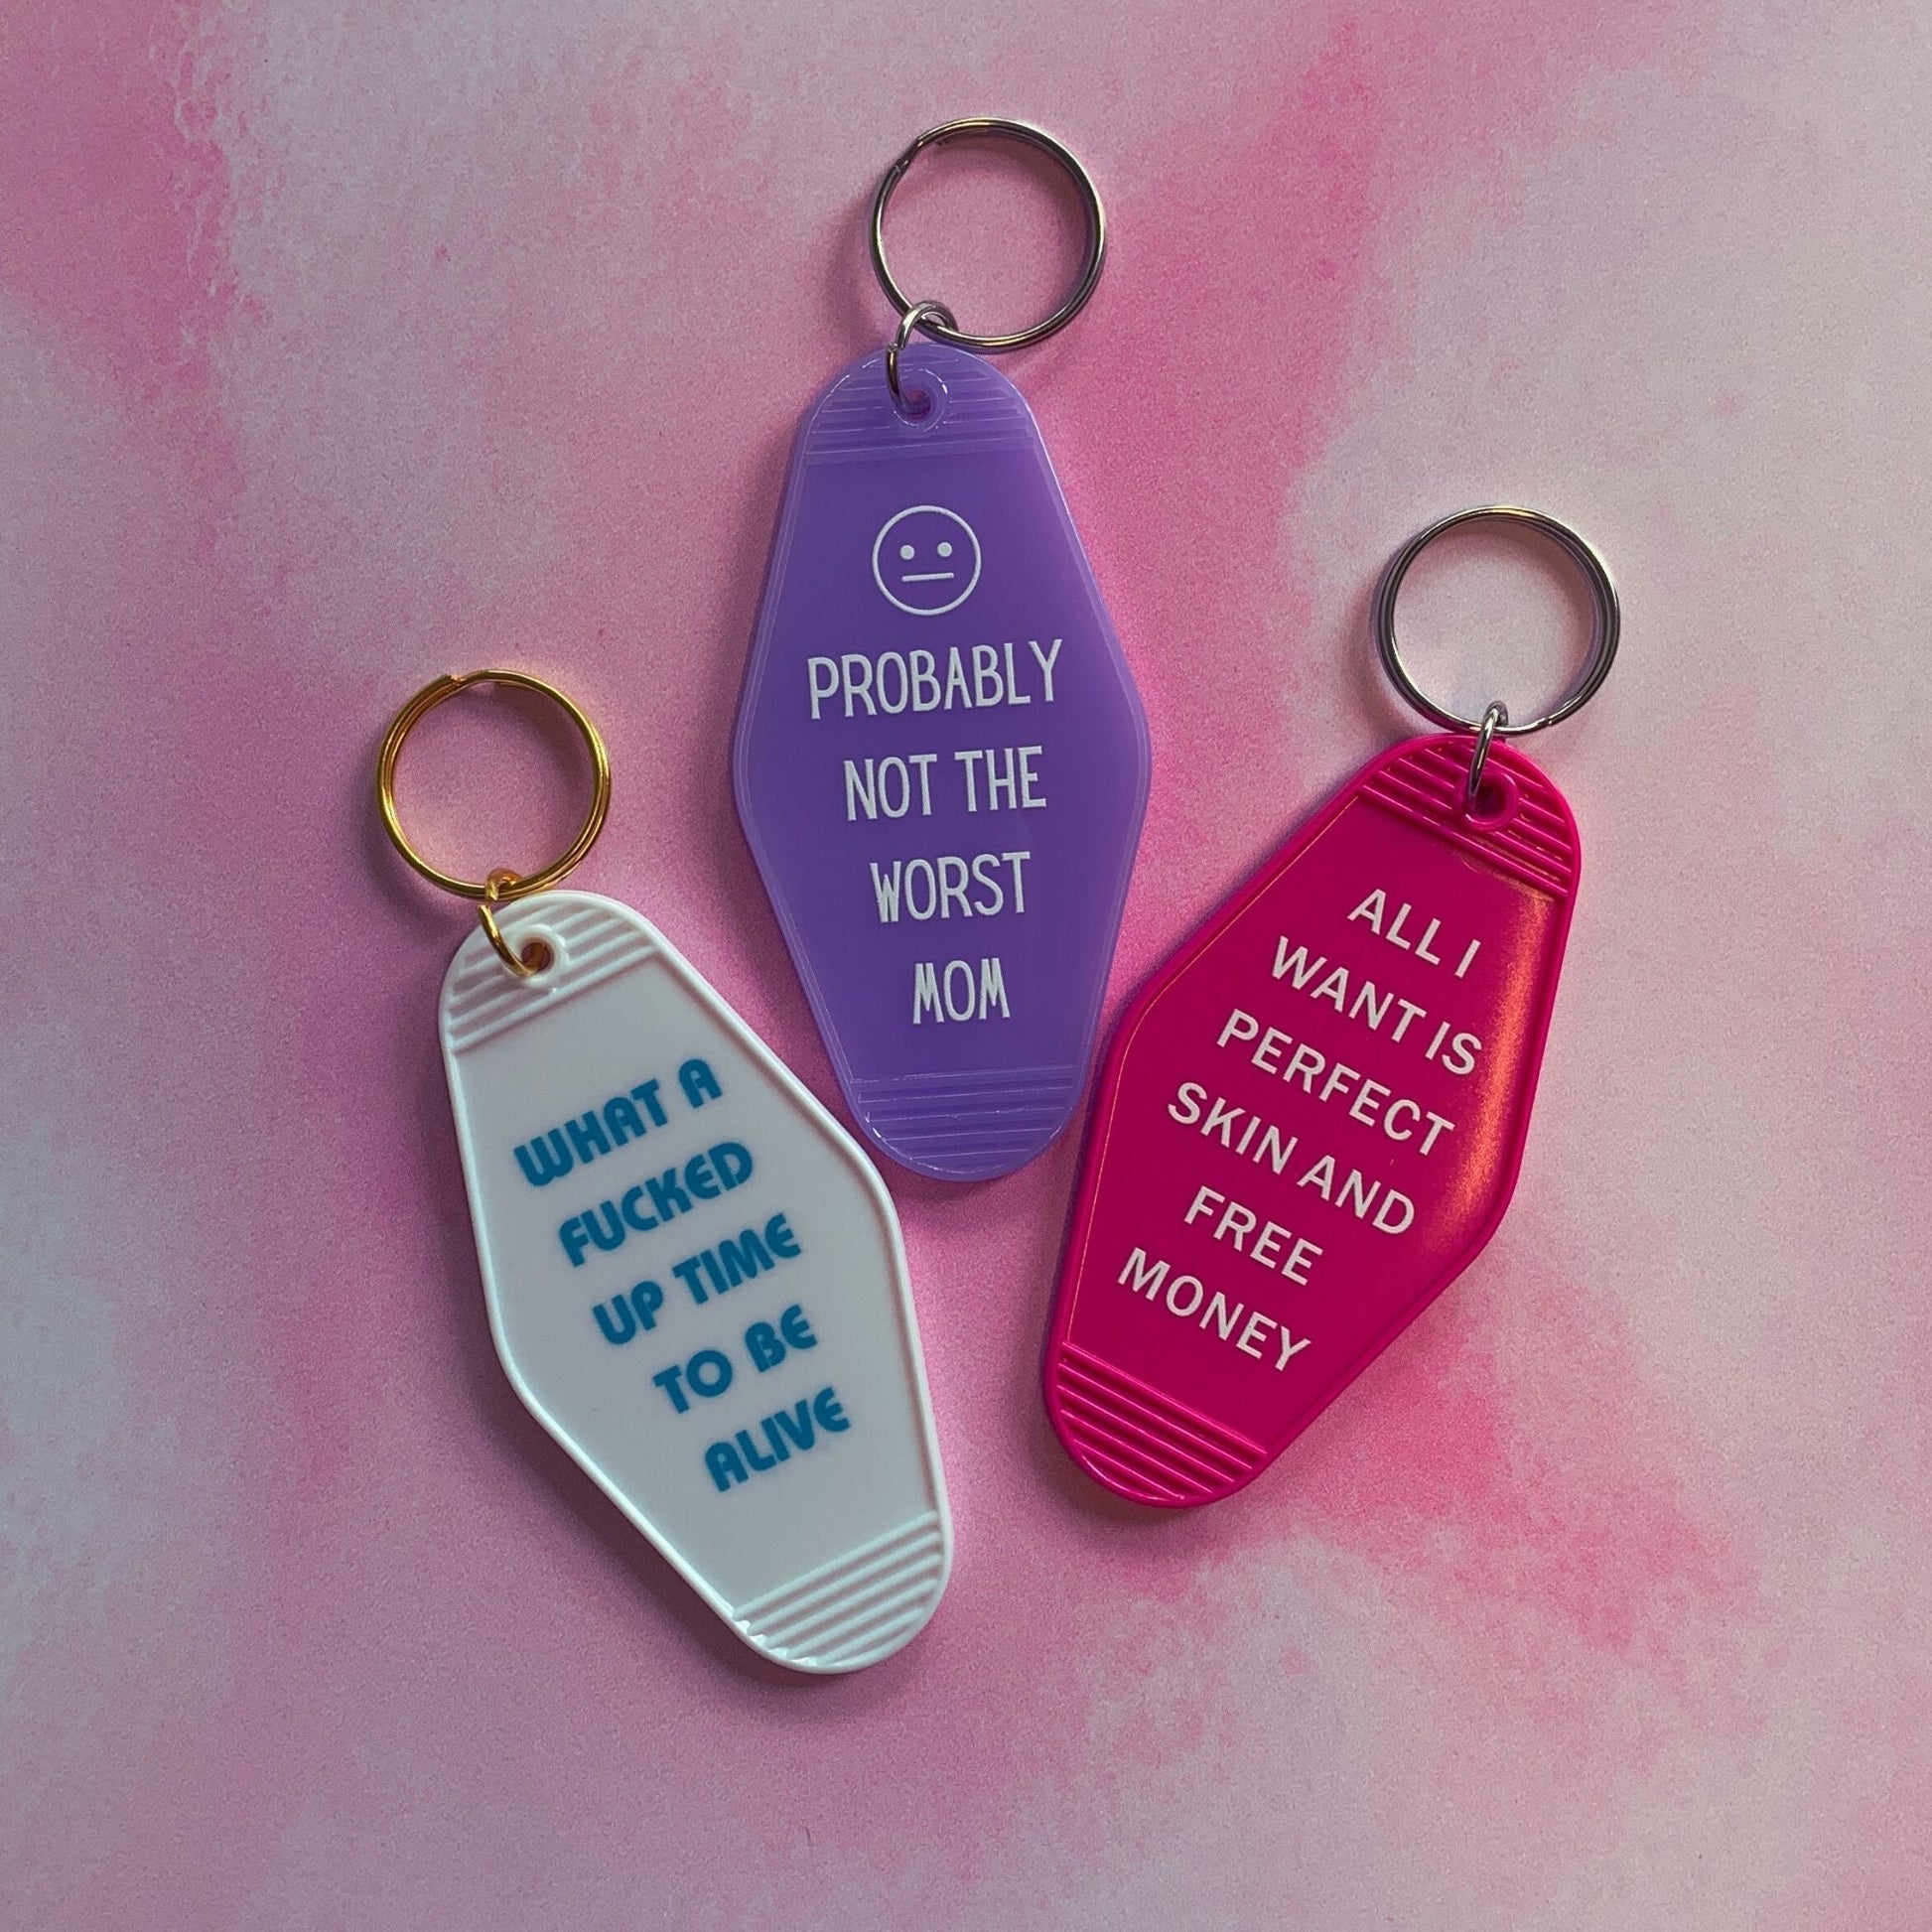 All I Want is Perfect Skin and Free Money Motel Style Keychain in Fuchsia Pink